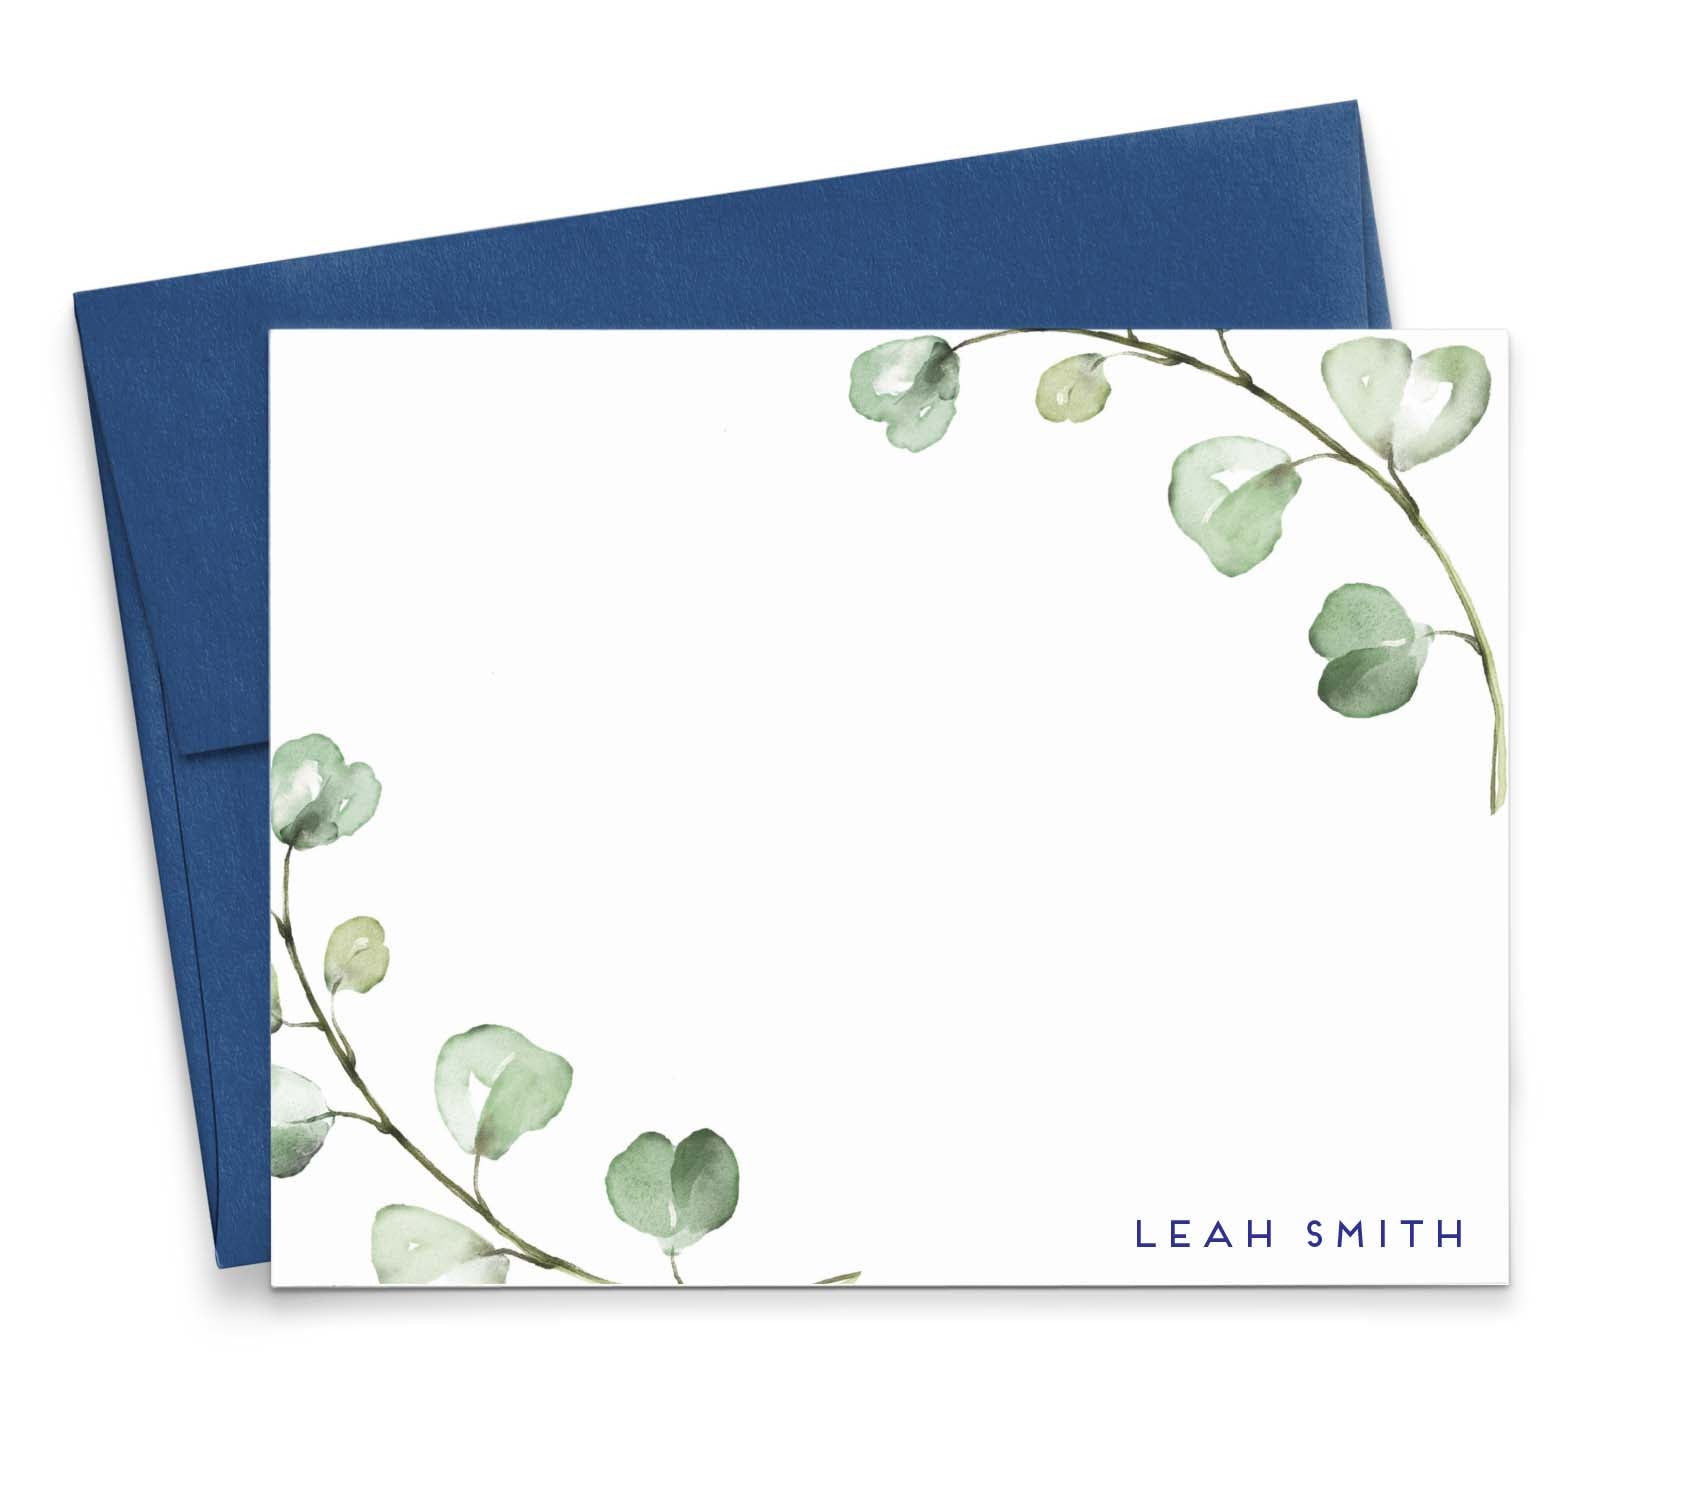 Personalized Cards With Envelopes